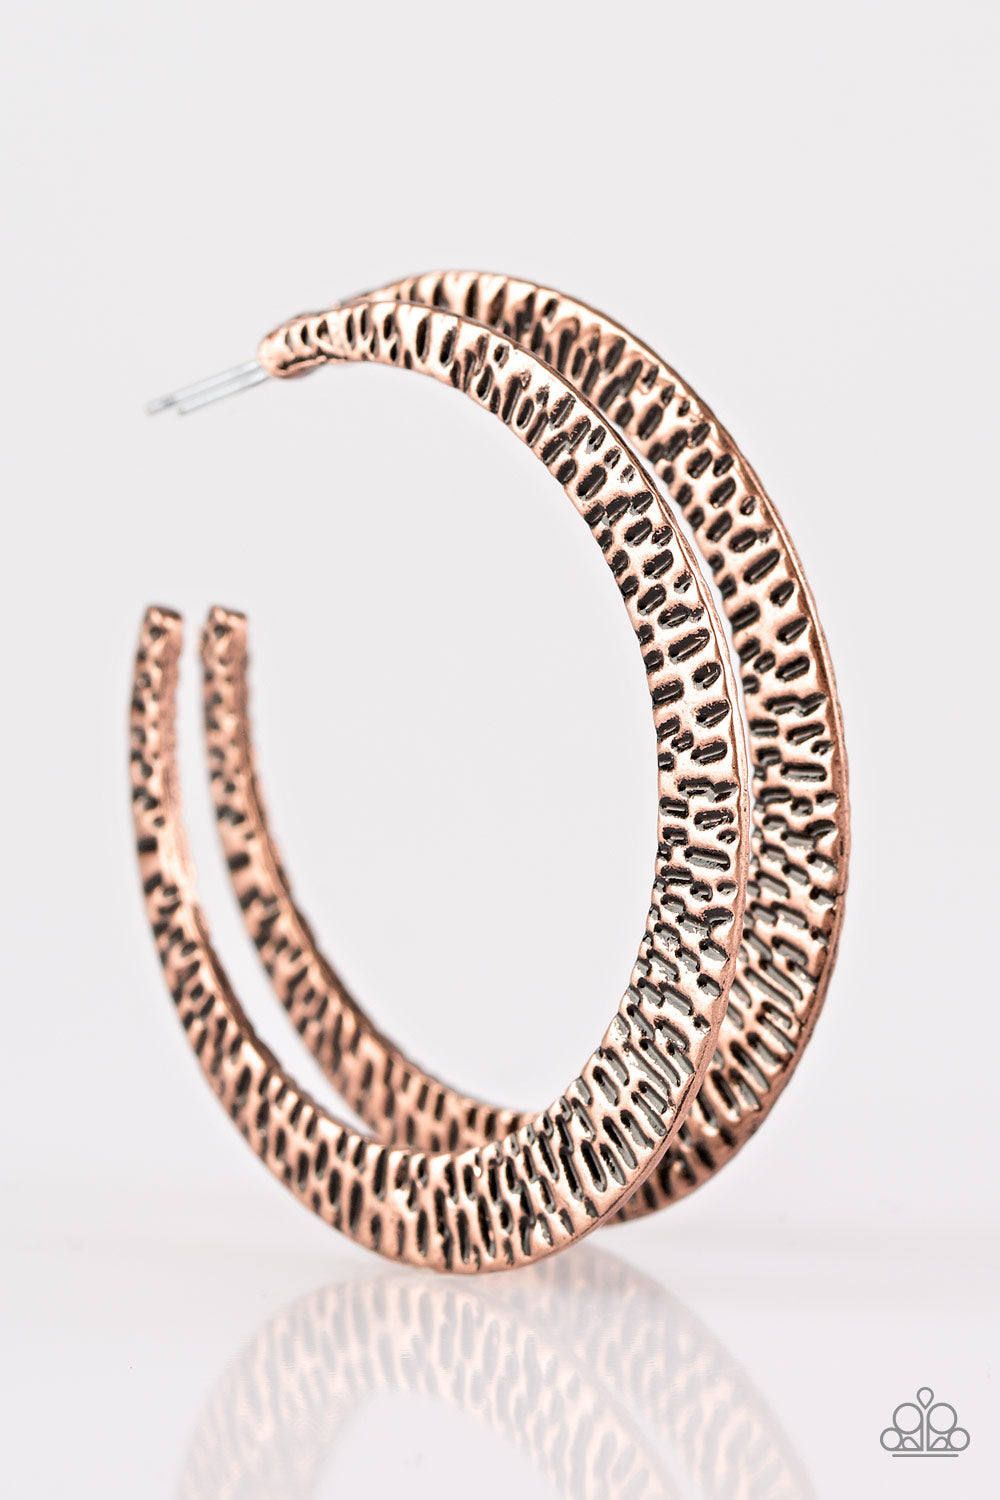 Delicately hammered in shimmery textures, a glistening copper hoop curls around the ear for a fierce fashion. Earring attaches to a standard post fitting. Hoop measures 2